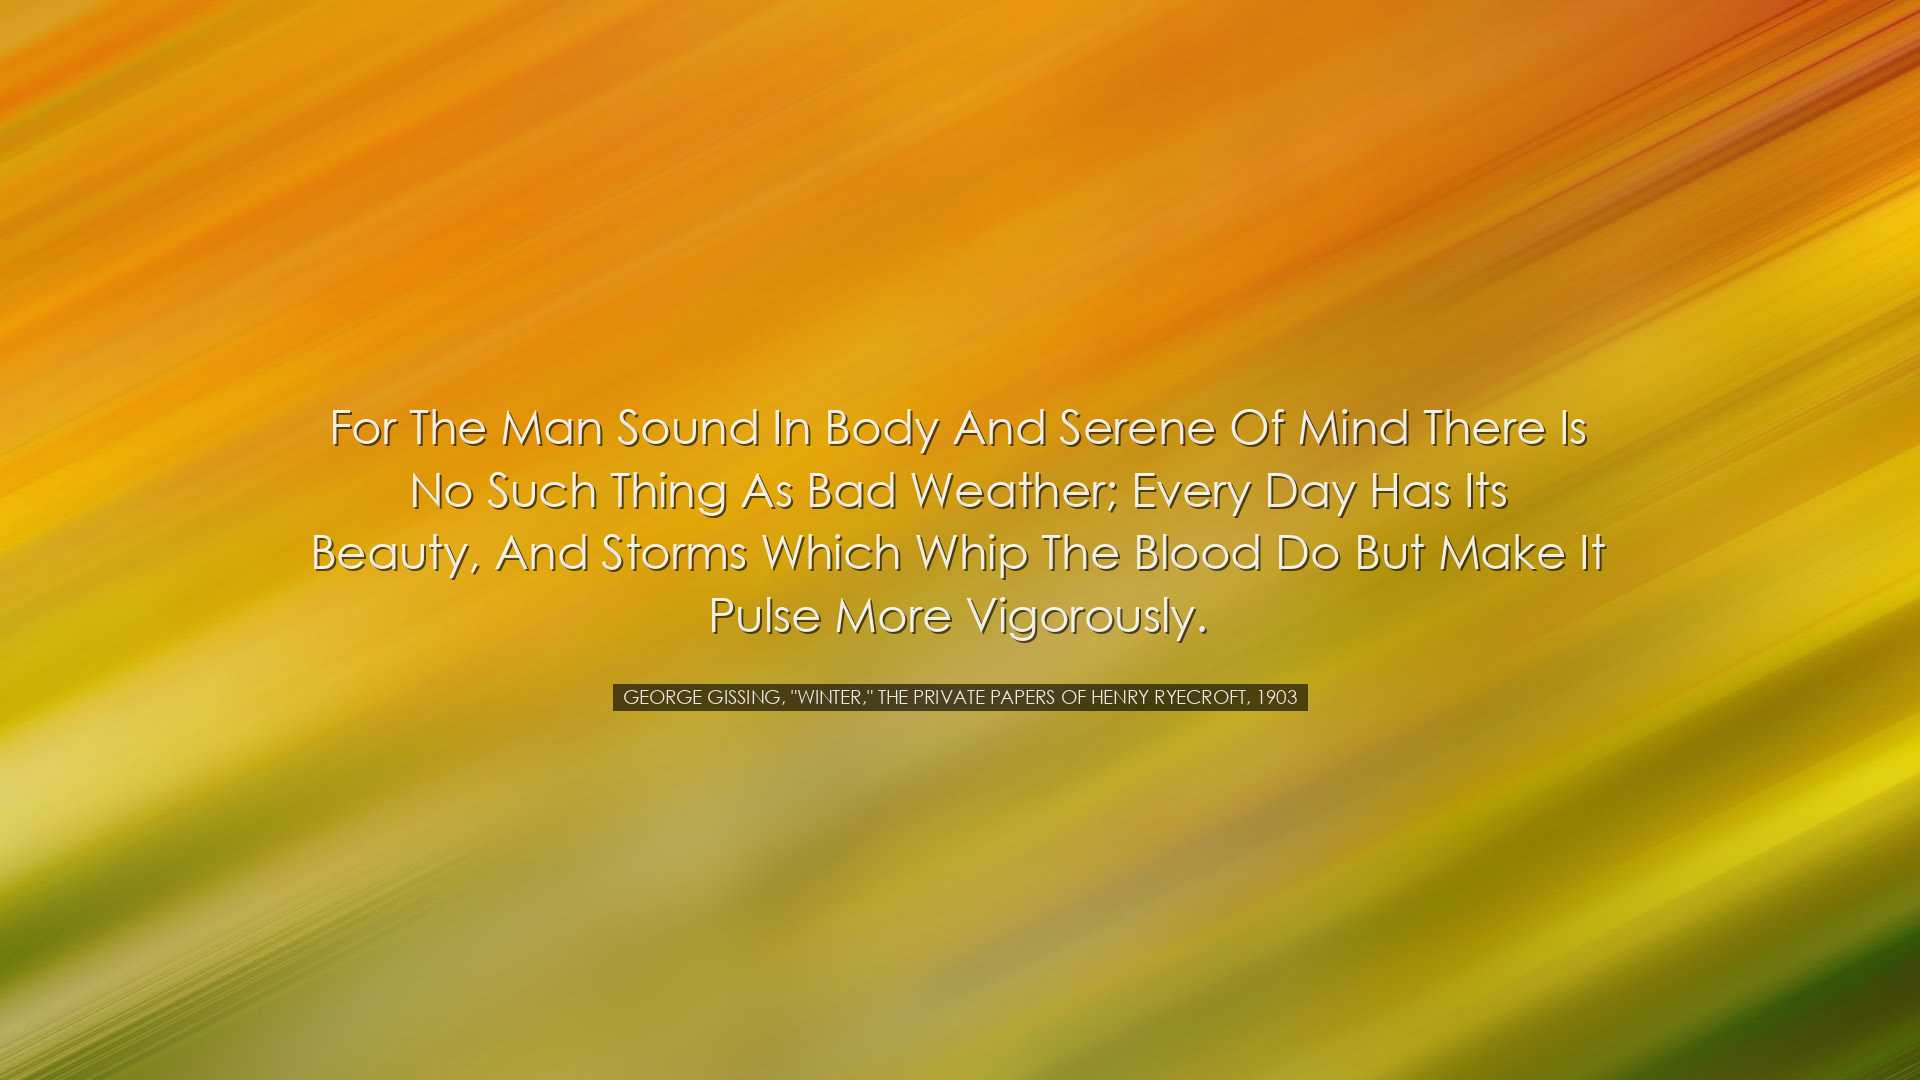 For the man sound in body and serene of mind there is no such thin